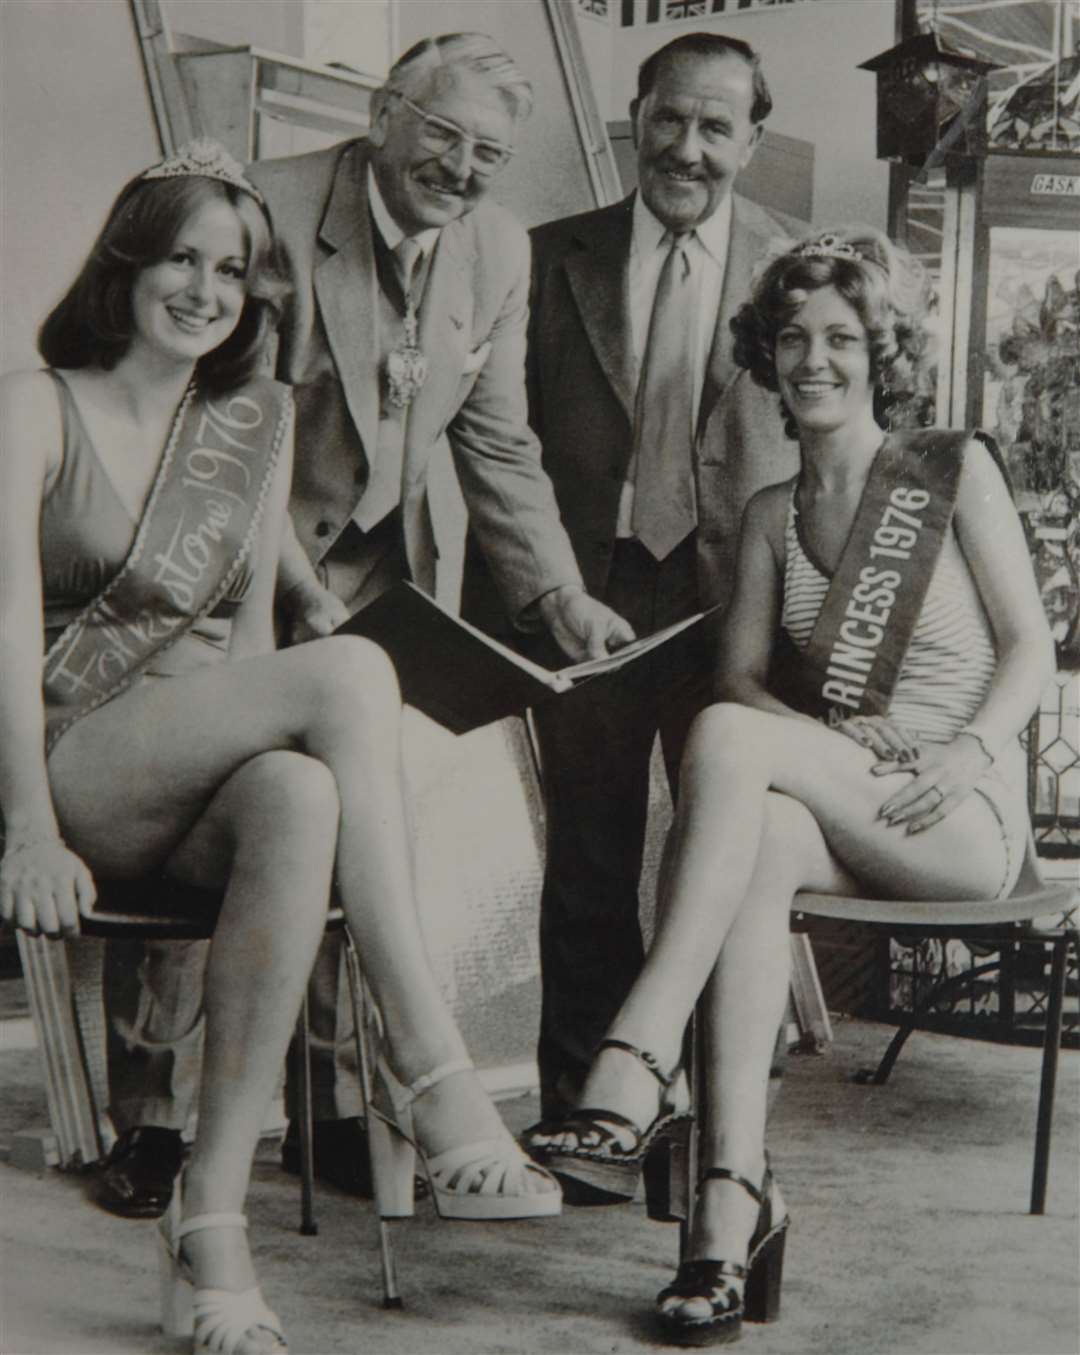 The Carnival Court for Folkestone's procession in 1976